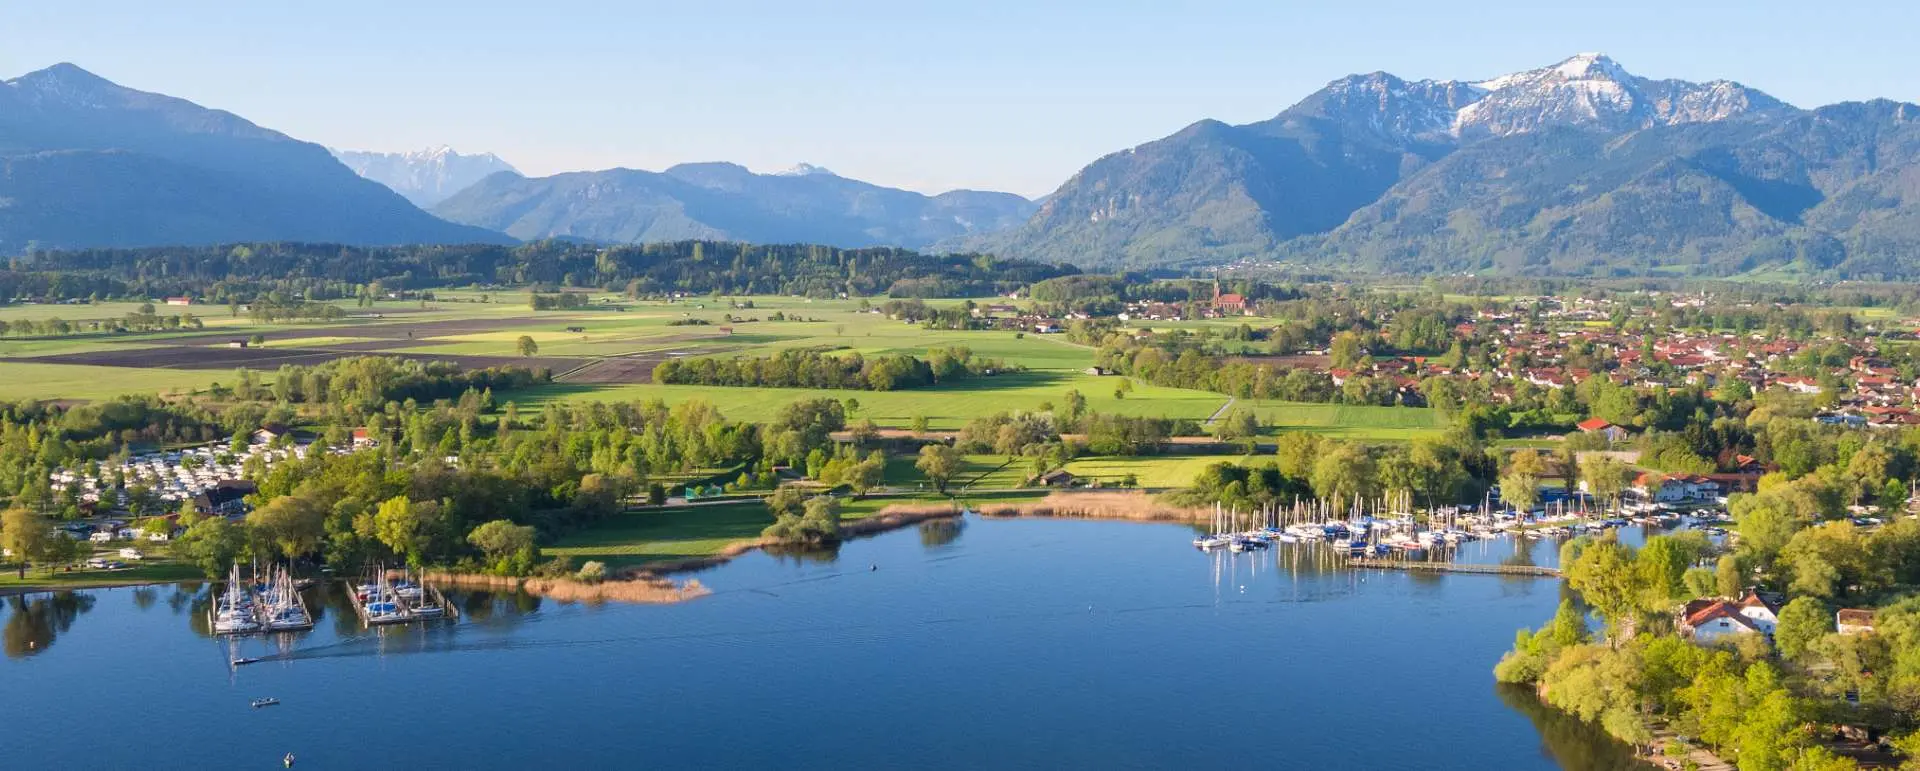 Chiemsee - the destination for families